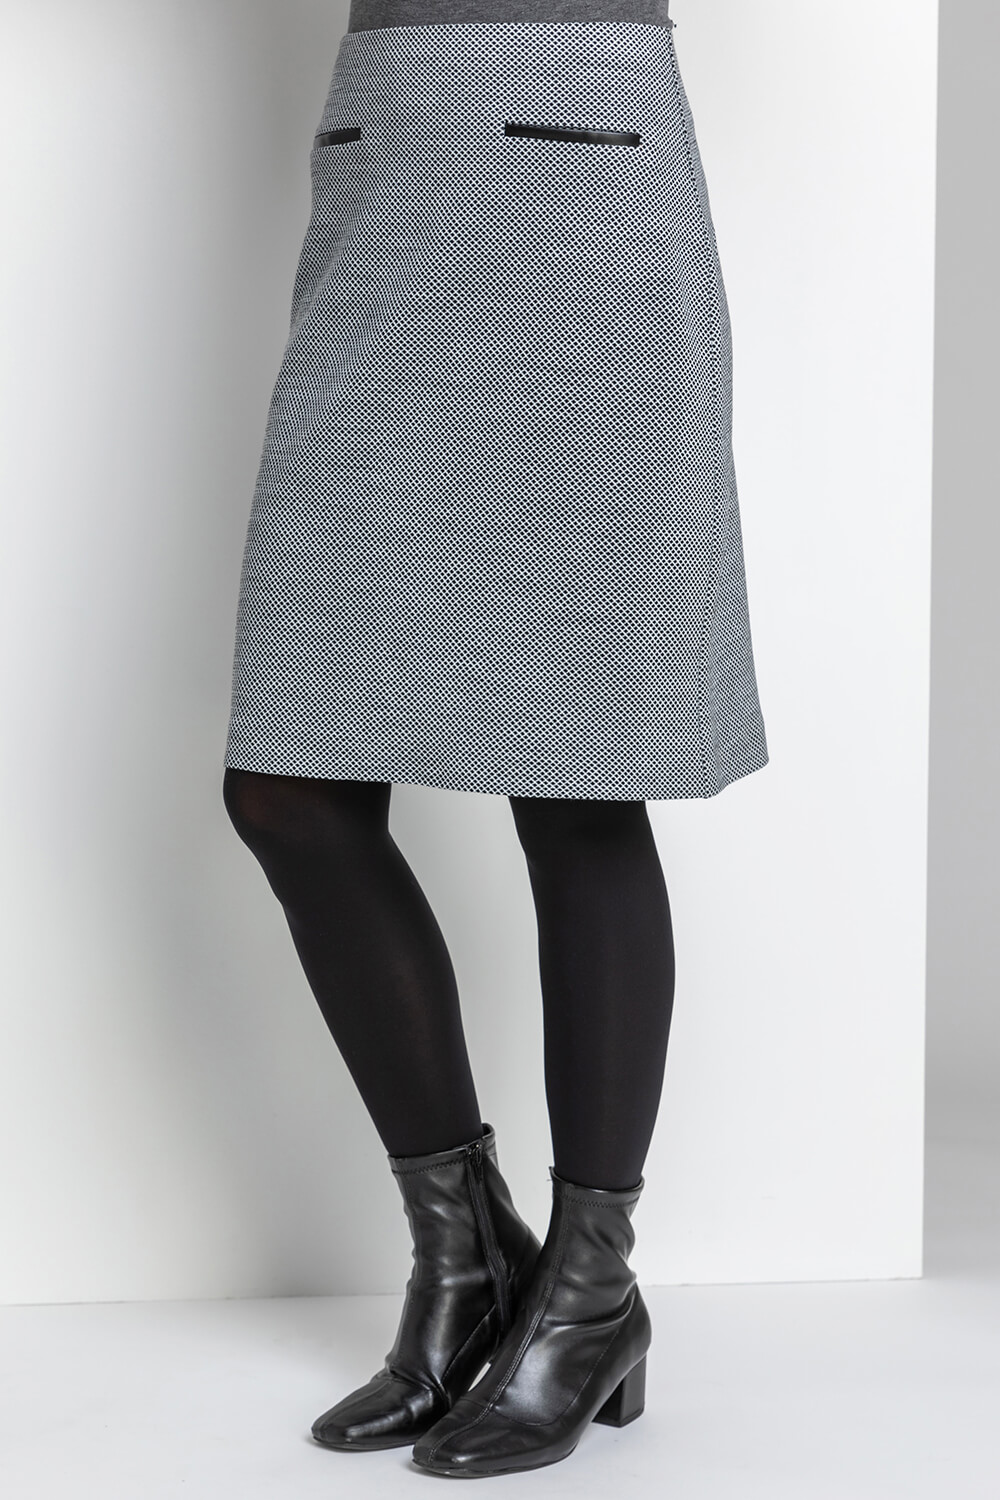 Black Two Tone Textured Skirt , Image 2 of 4